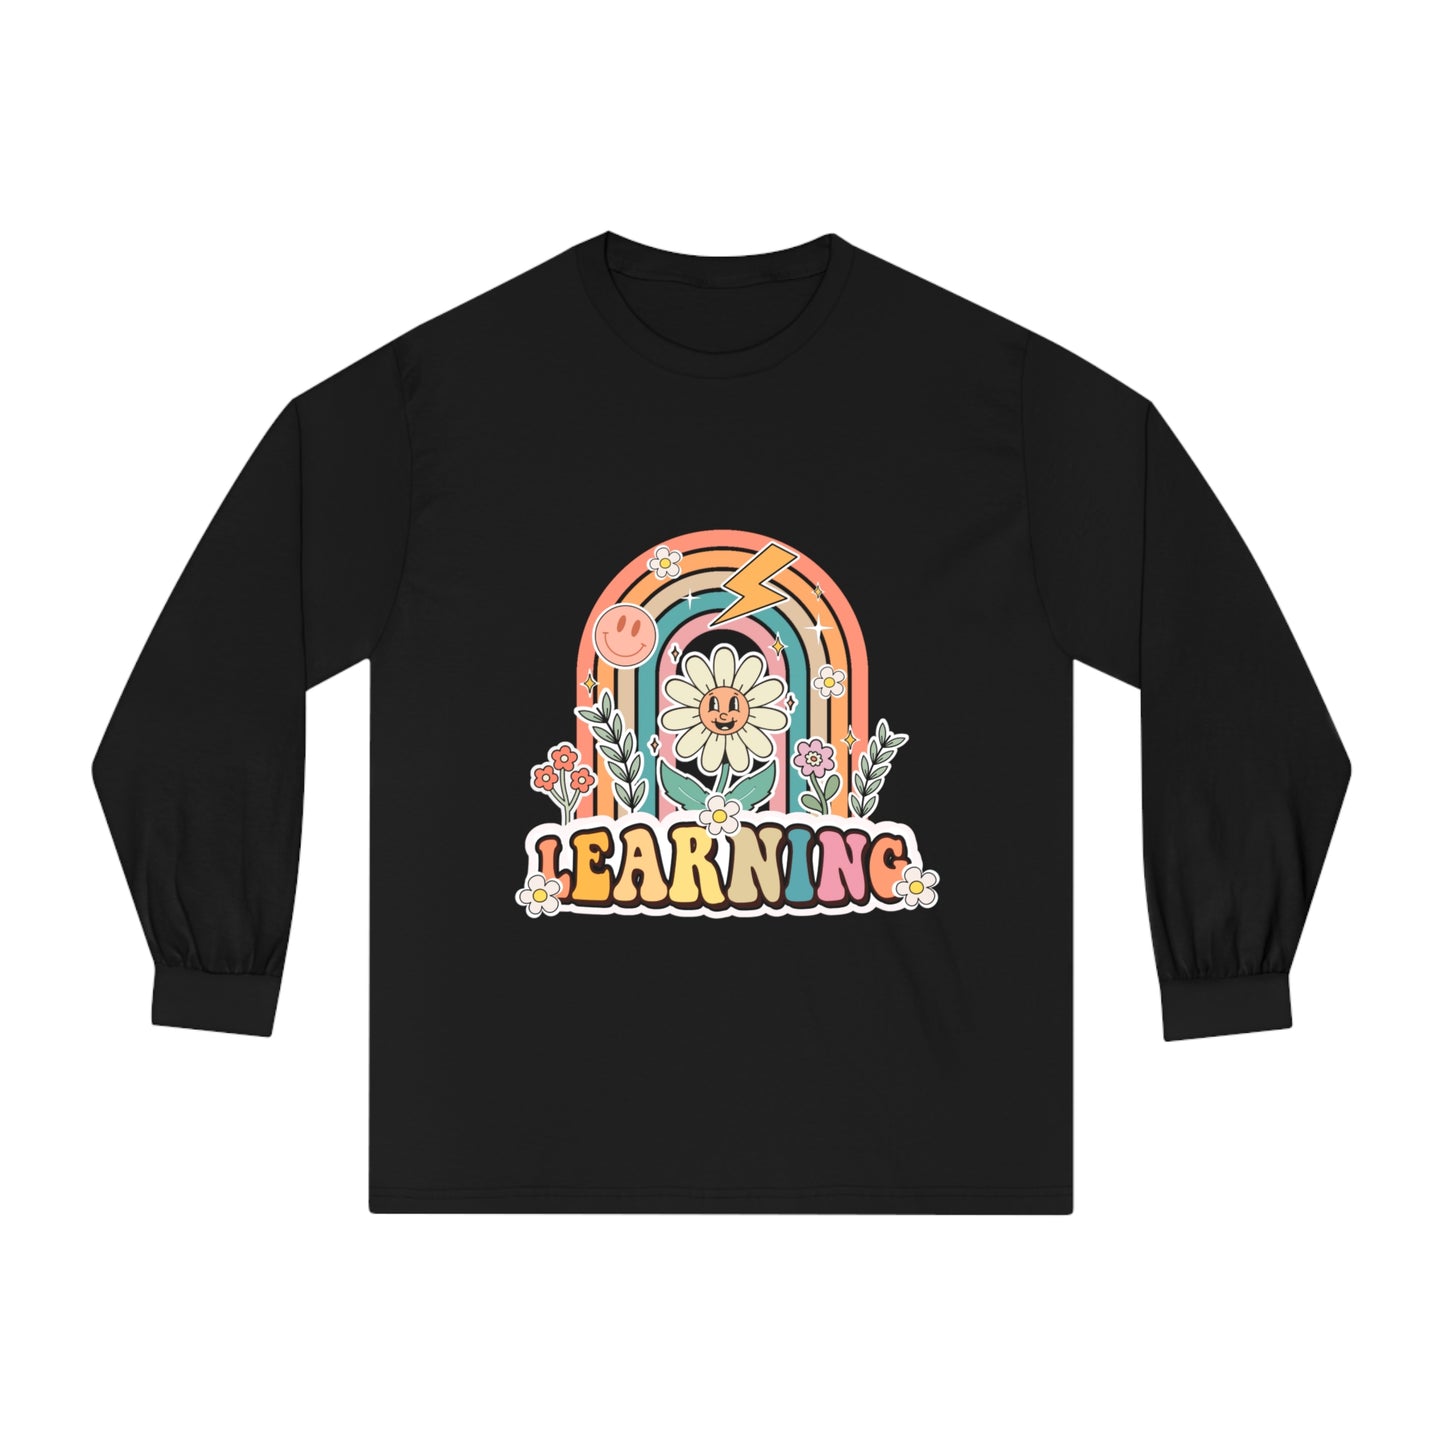 It's a Beautiful Day for Learning - Unisex Classic Long Sleeve T-Shirt